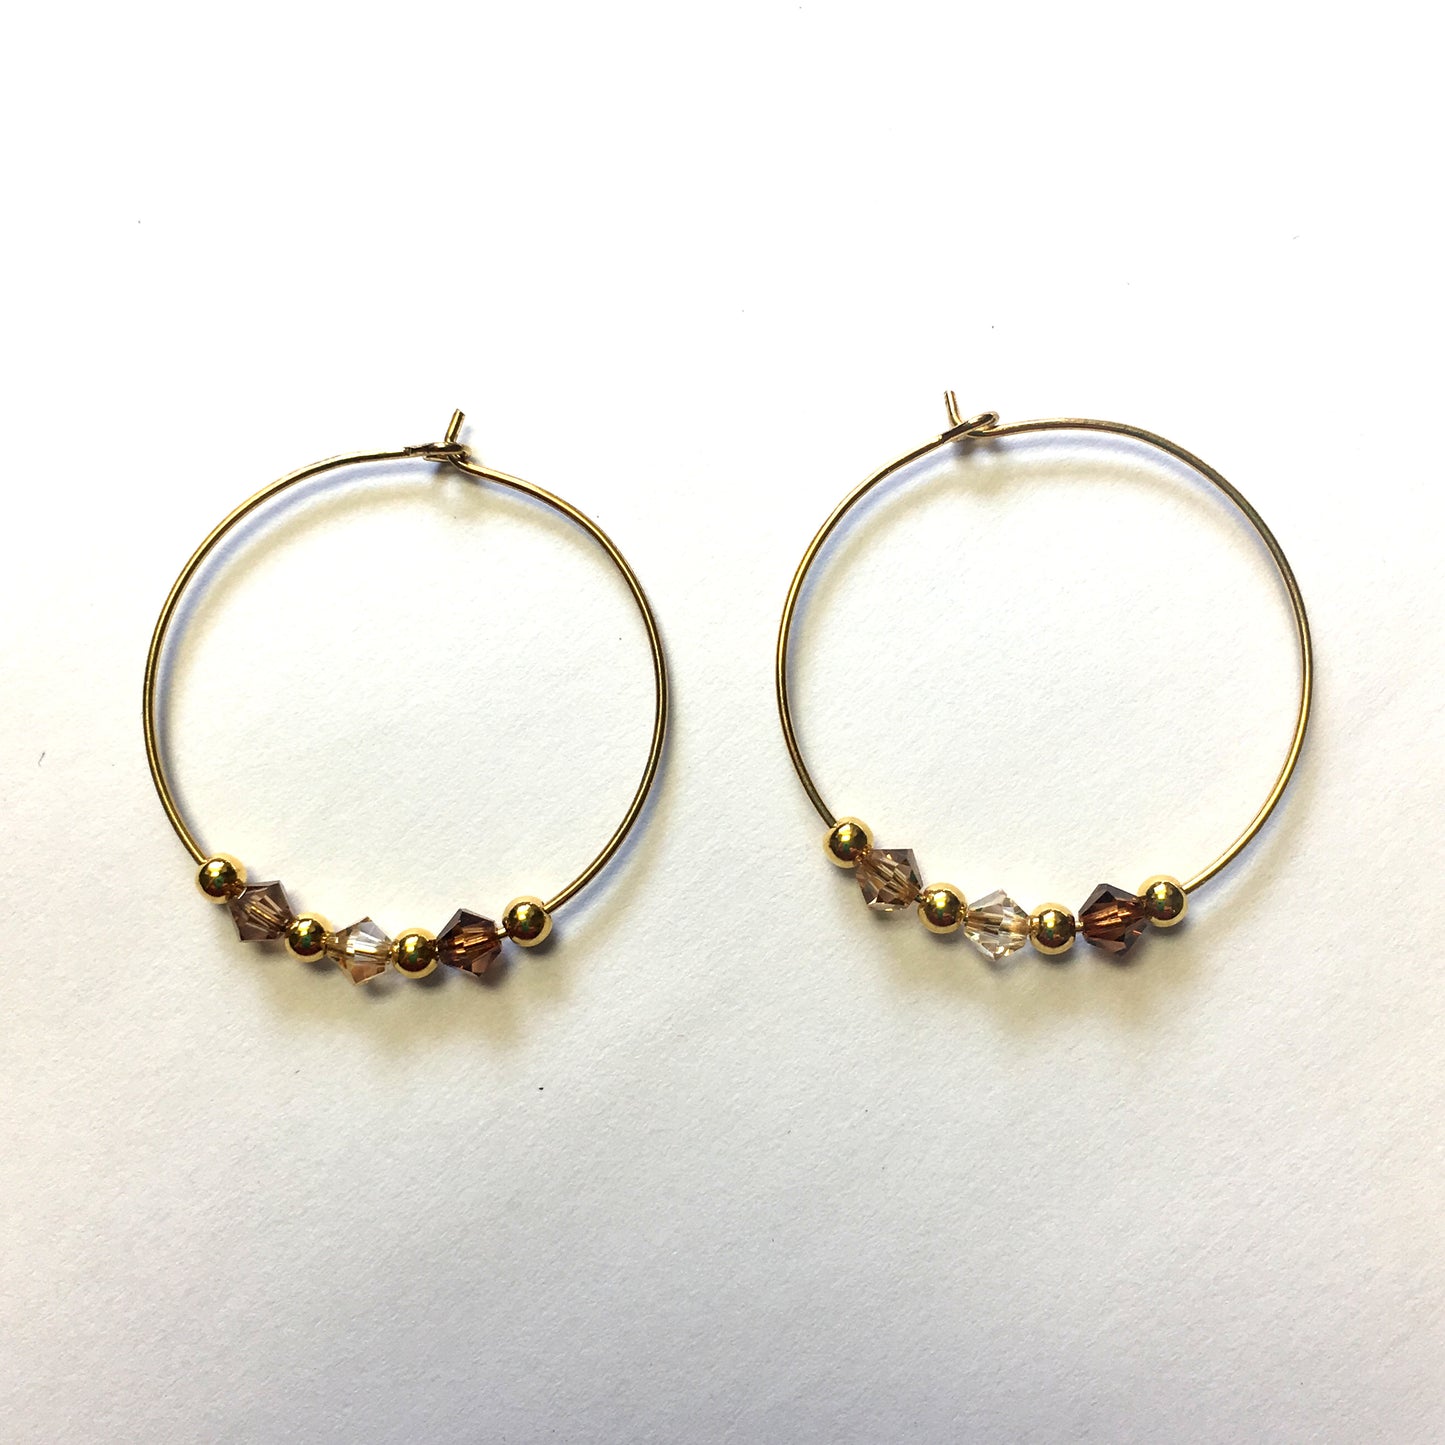 Shades of Brown Swarovski Crystals on Gold Plated Earring Hoops